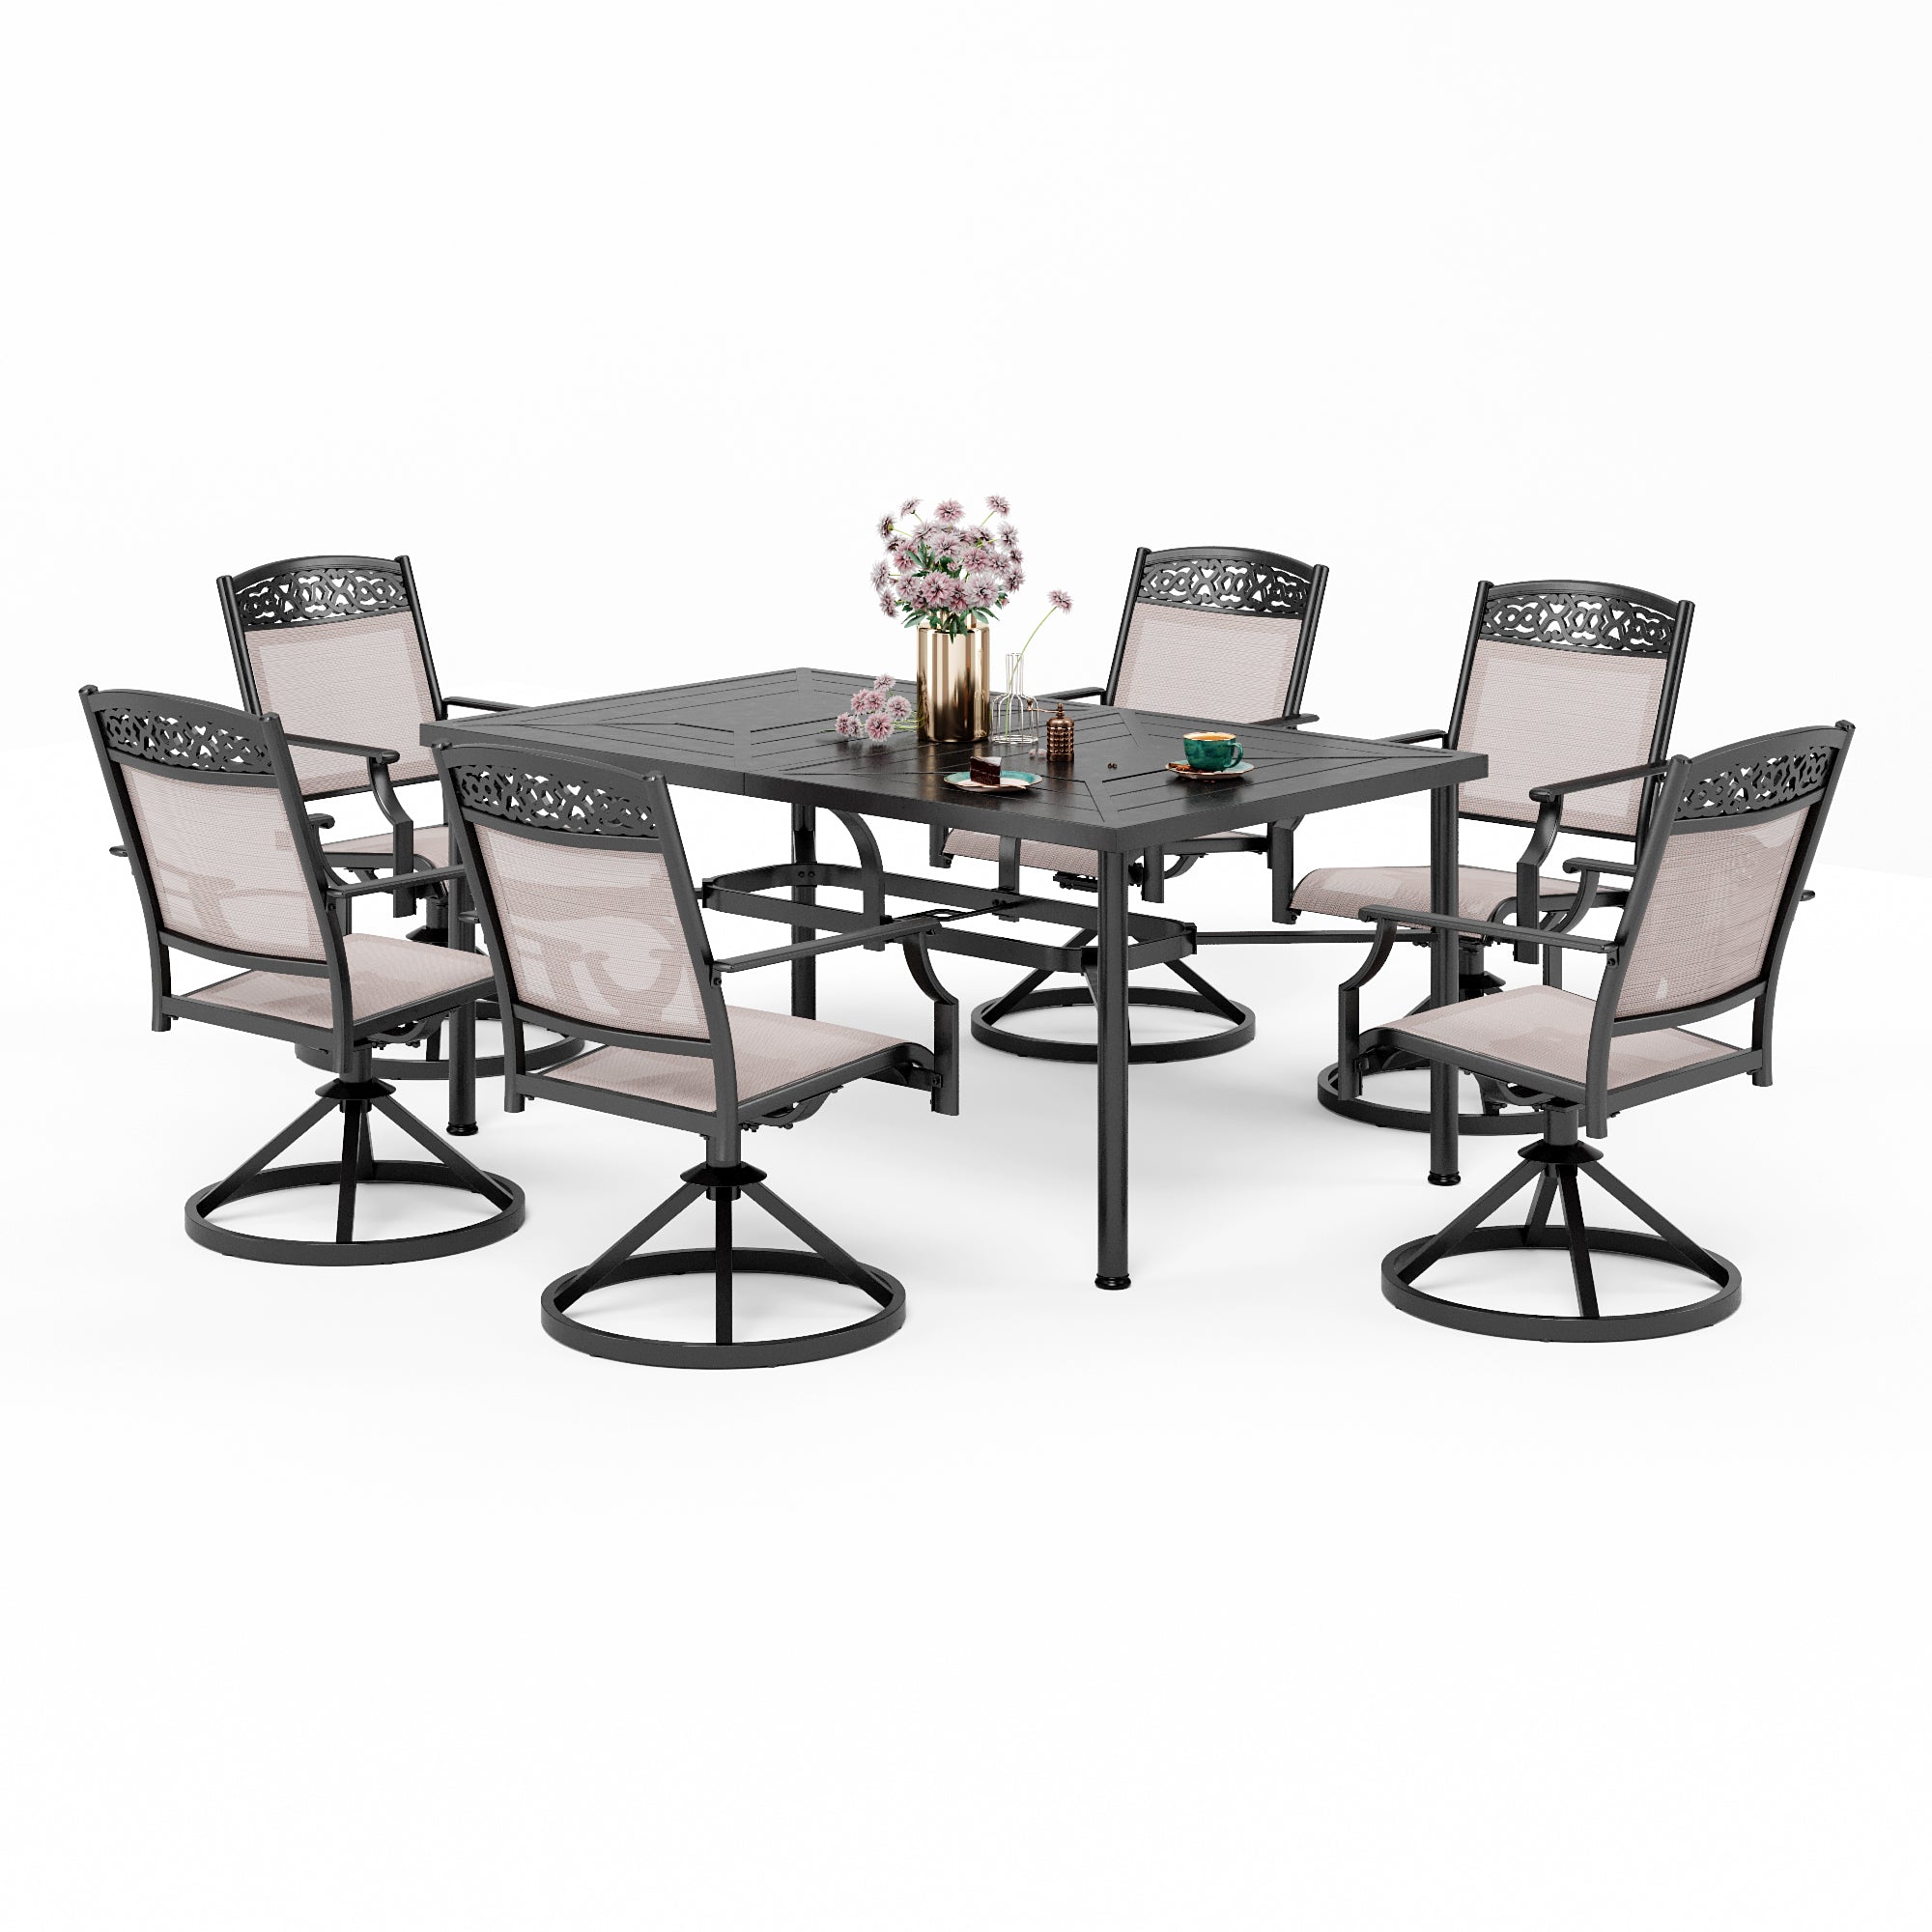 Sophia & William 7-Piece Patio Dining Set Geometrically Stamped Rectangle Table & Cast Aluminum Pattern Textilene Dining Chairs